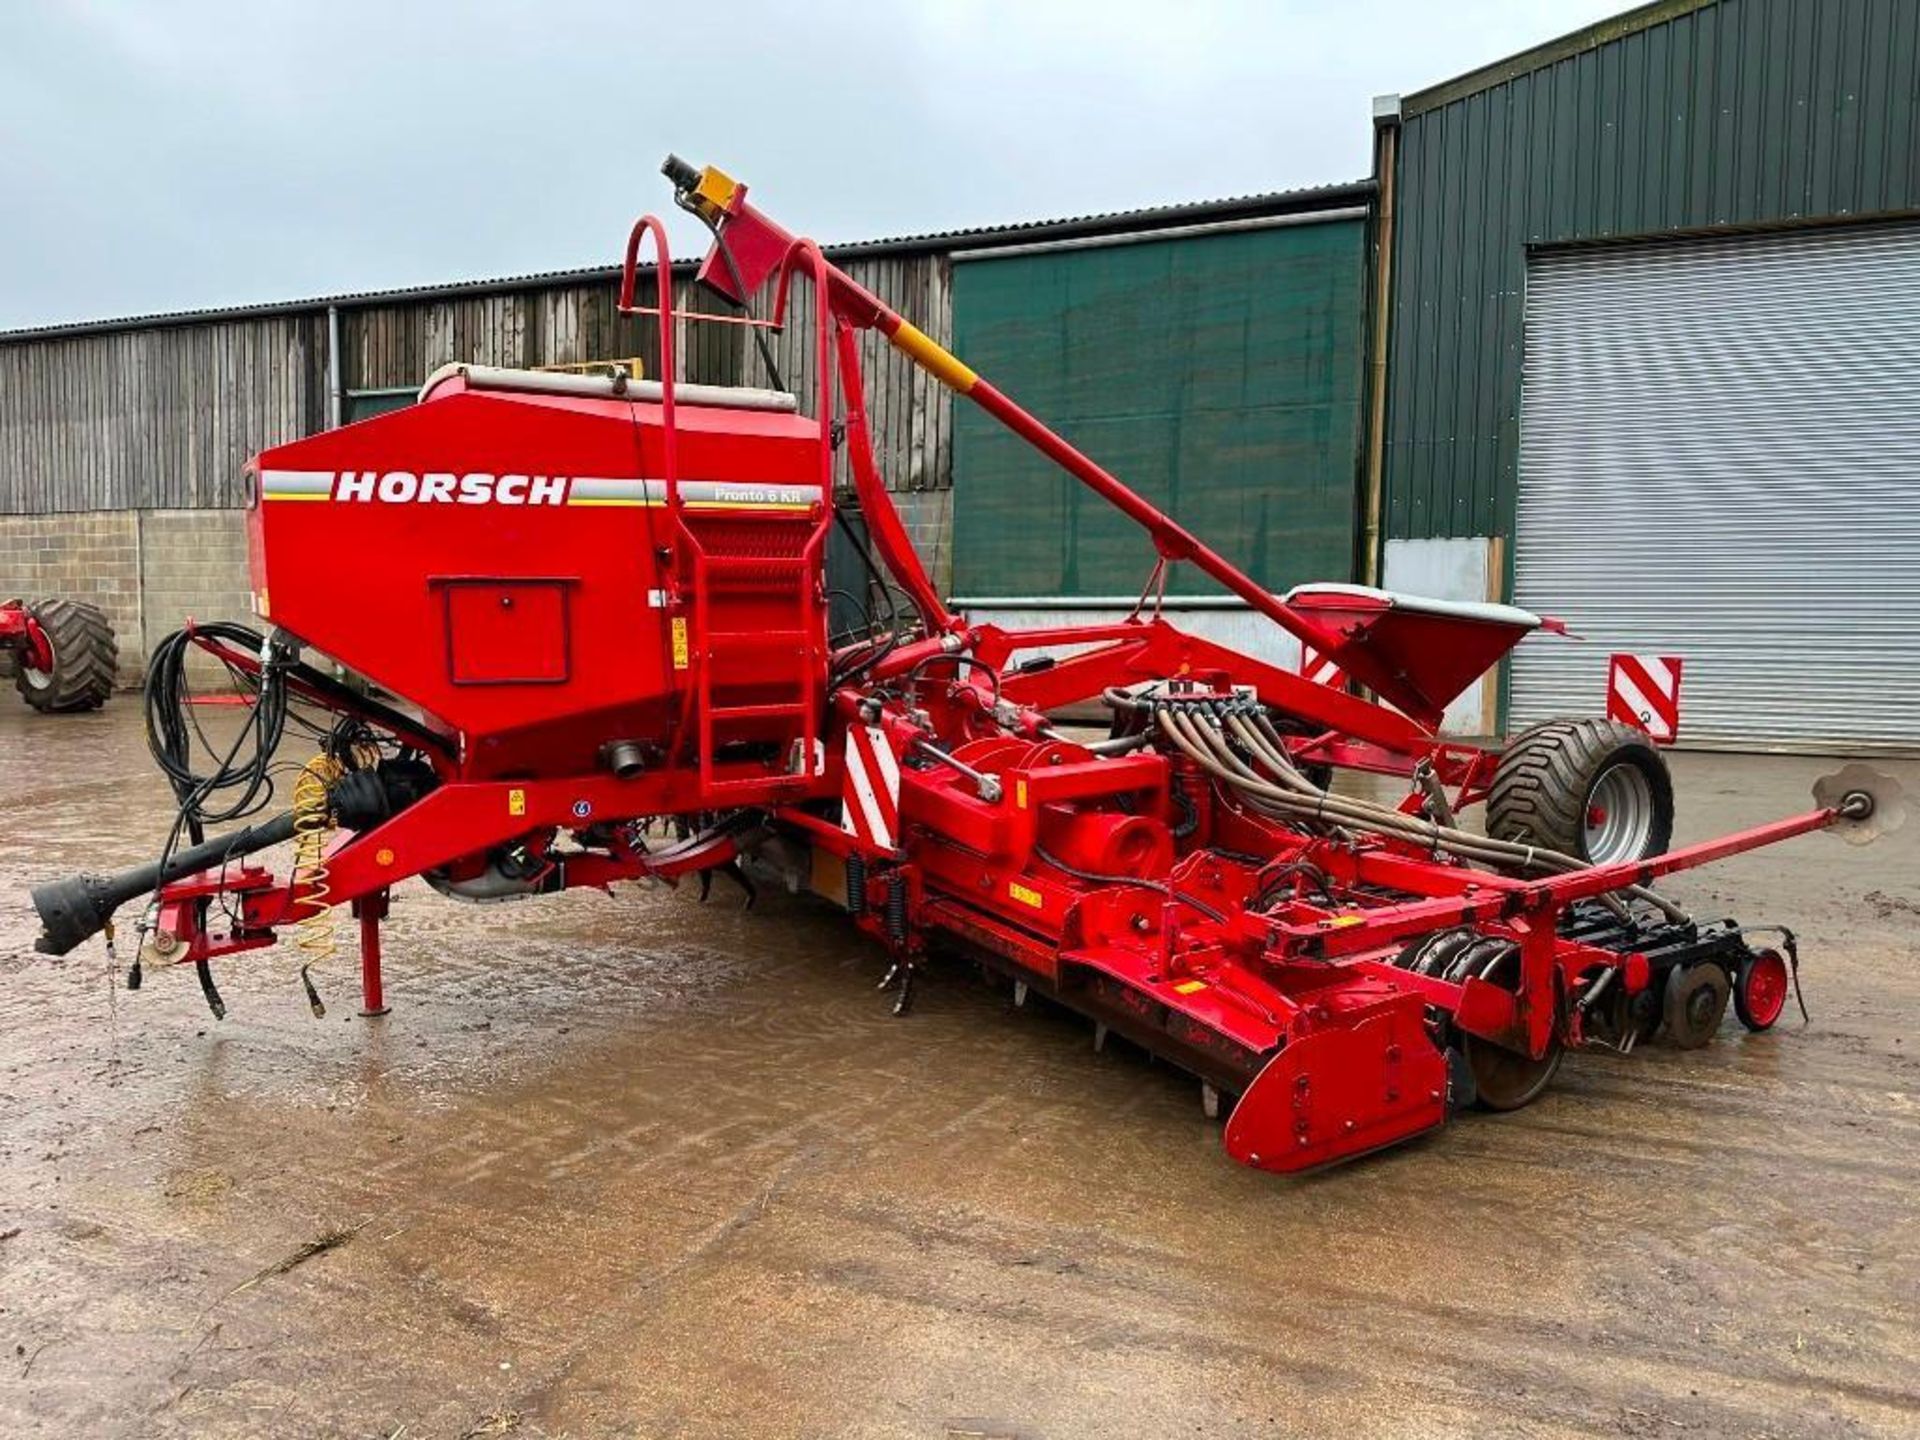 2011 Horsch Pronto 6 KR, 6m, trailed combination drill, single hopper, filling auger, pre-emergence - Image 9 of 13